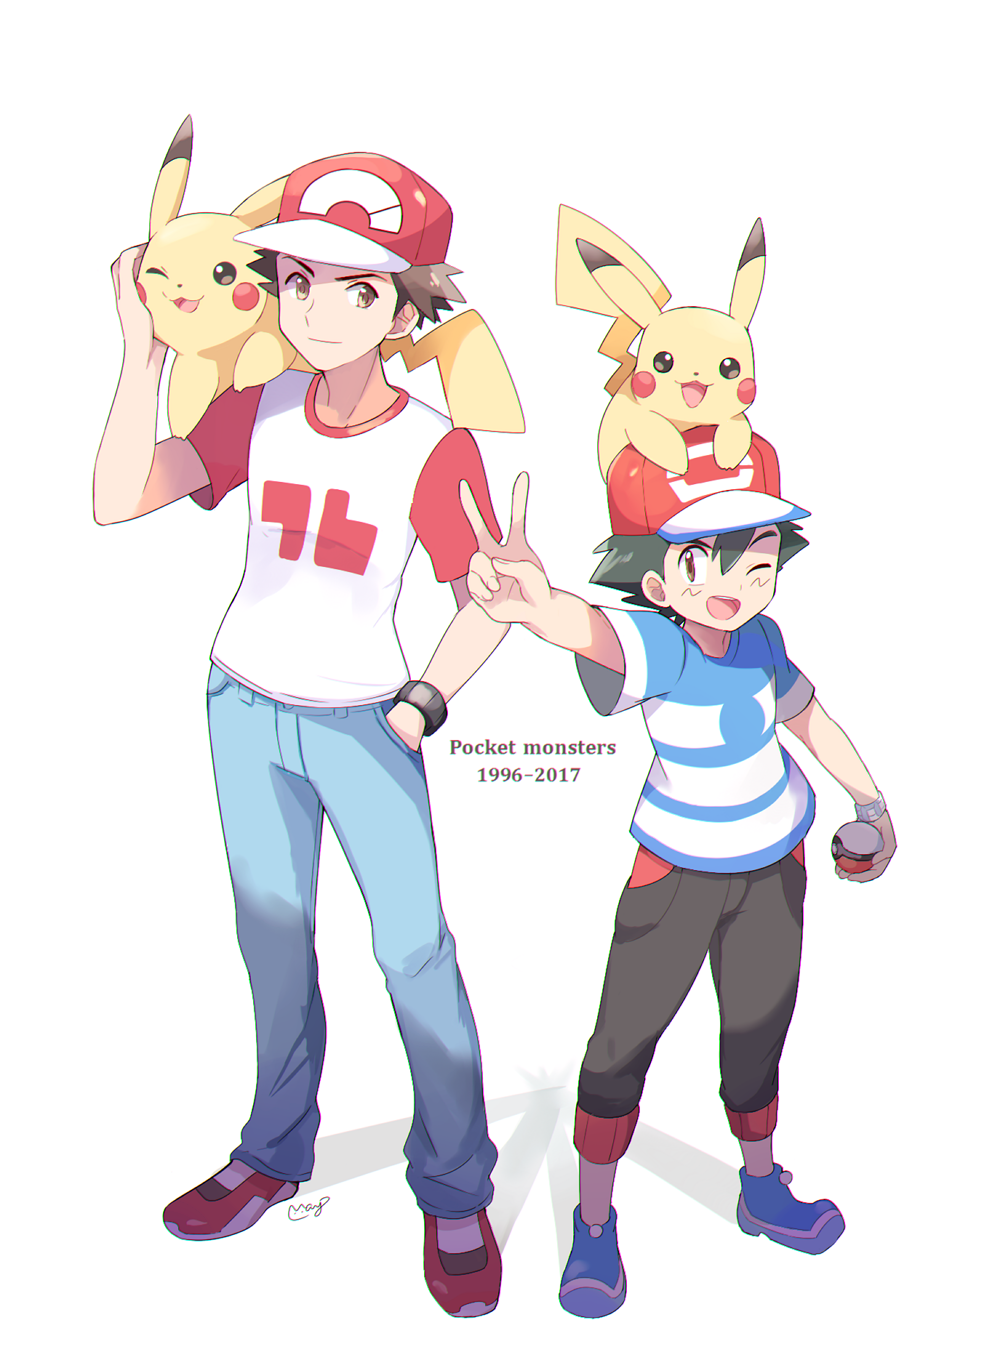 ash ketchum, red, and pixiv red (pokemon and 5 more) drawn by yache